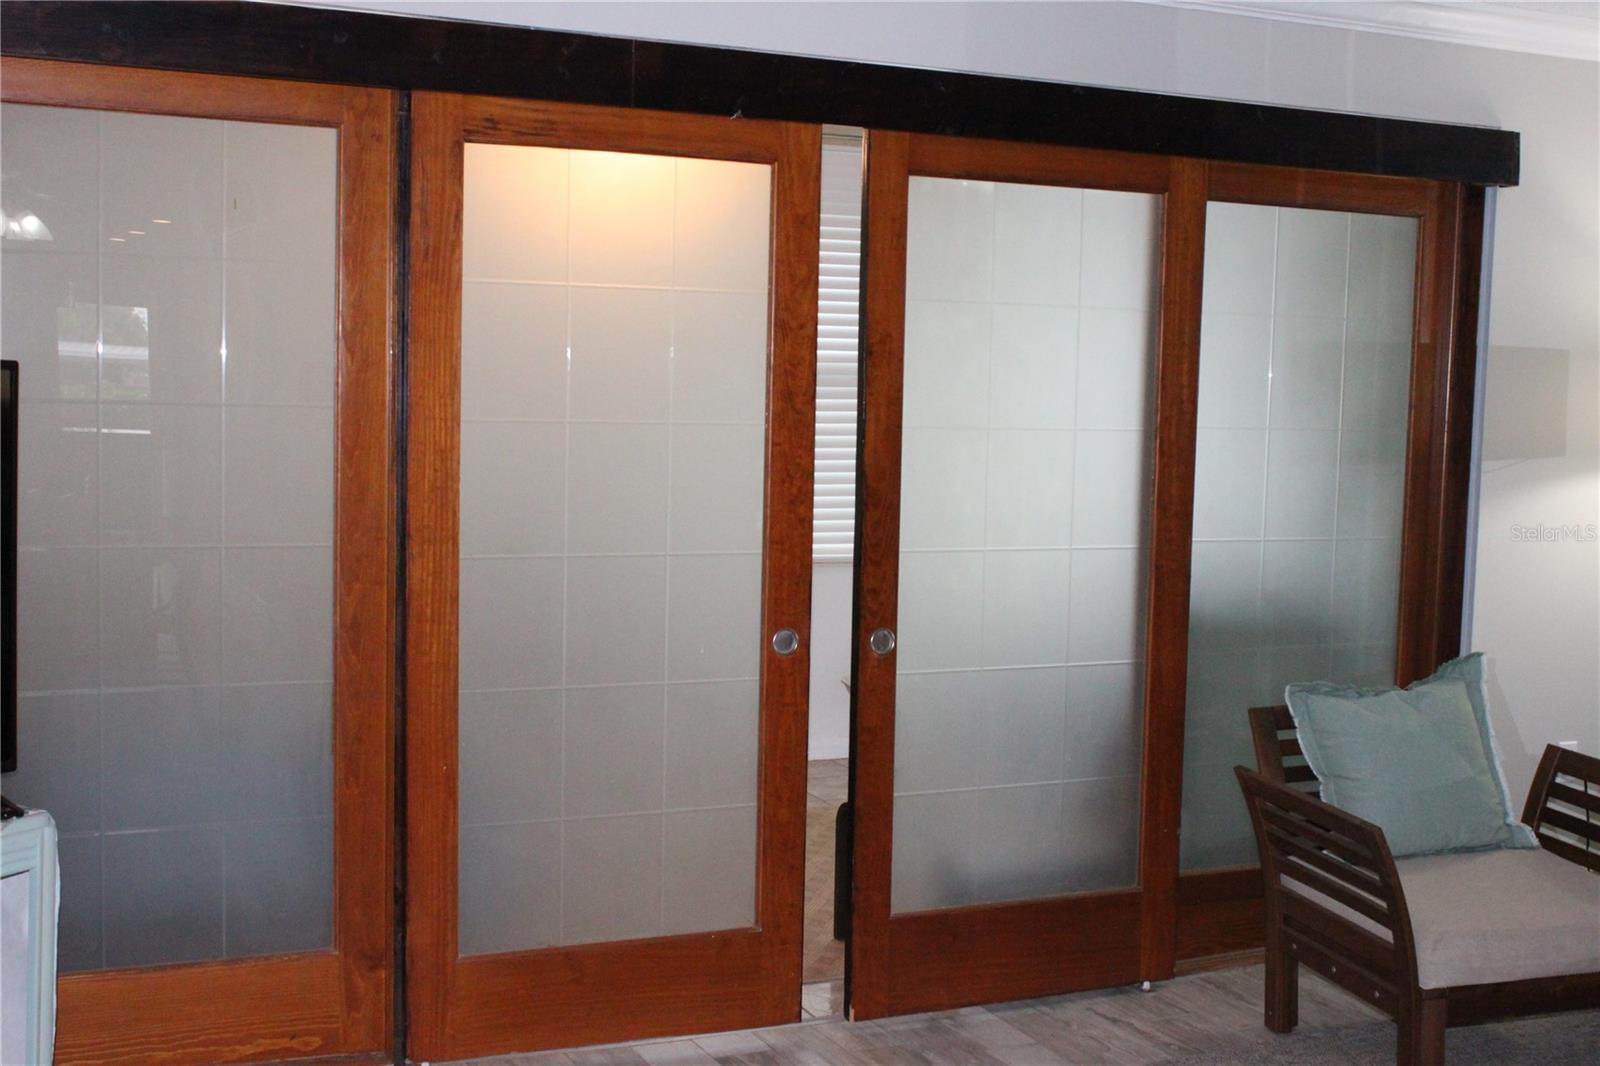 Privacy doors for guest